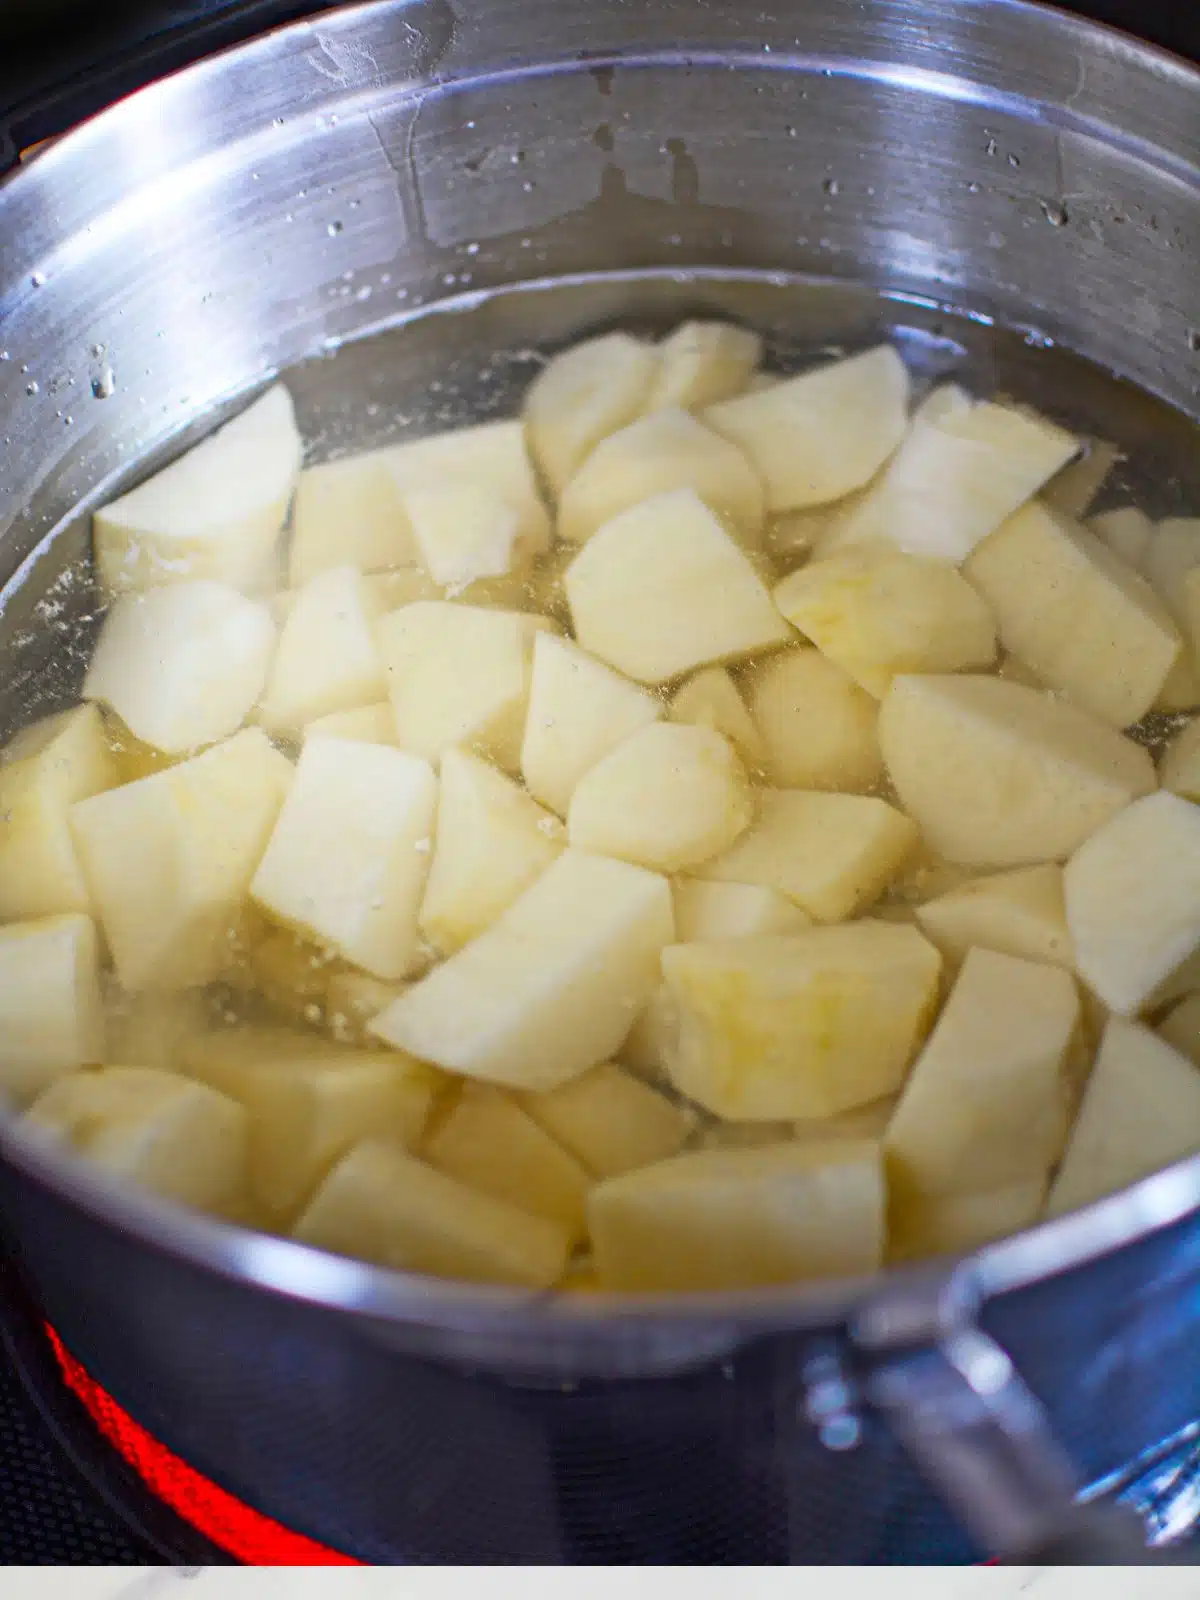 peeled potatoes in pot with water.